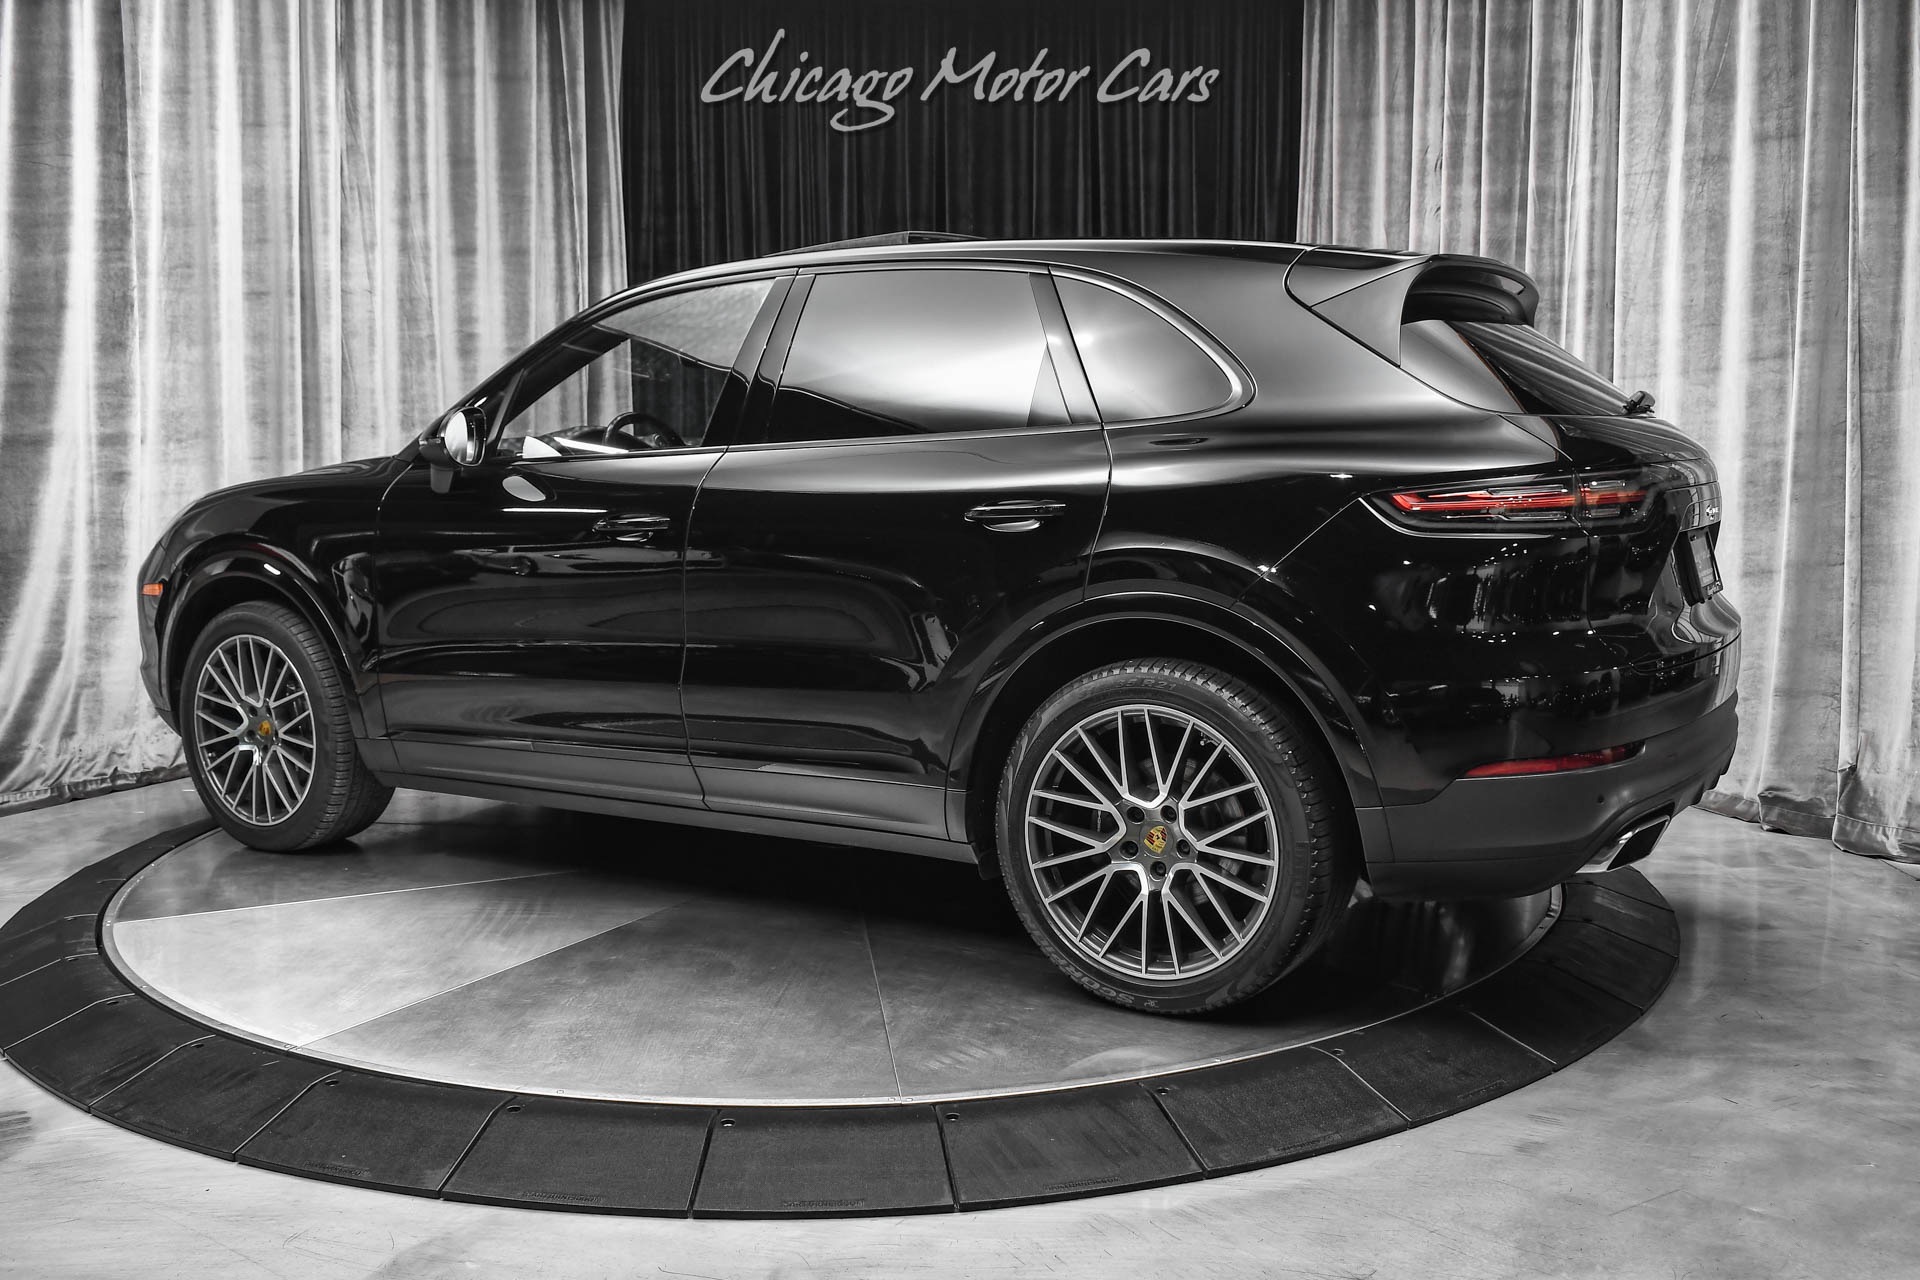 Used-2019-Porsche-Cayenne-SUV-21-RS-Spyder-Wheels-Panoramic-Roof-Well-Equipped